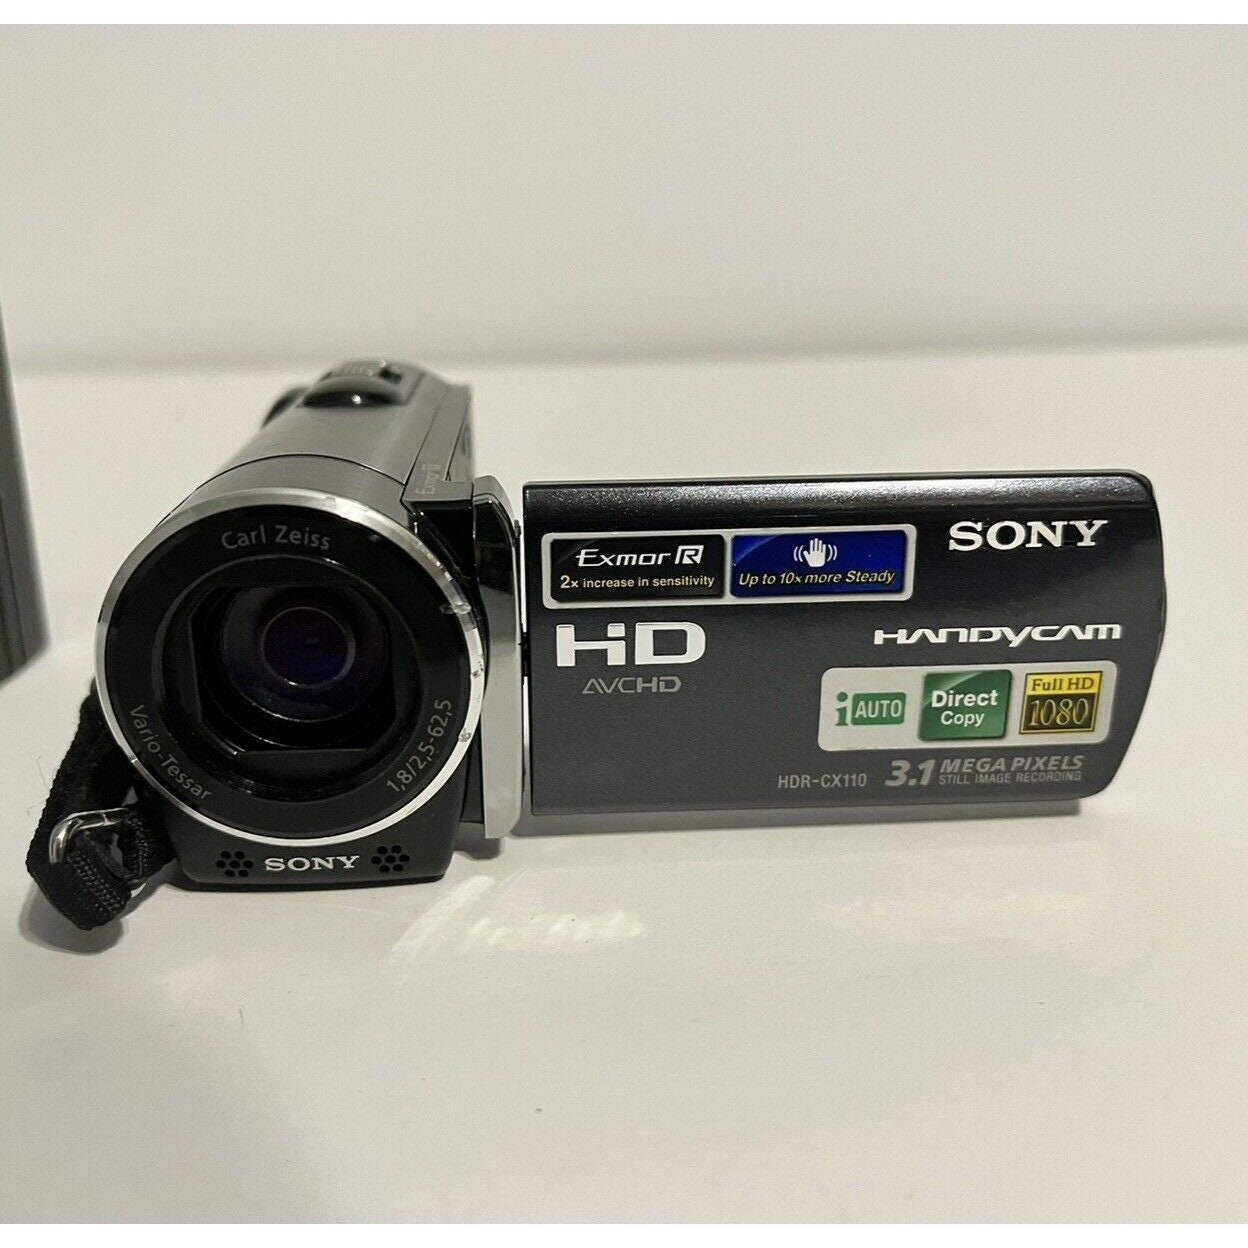 Sony HDR-CX110 High-Definition Handycam Camcorder